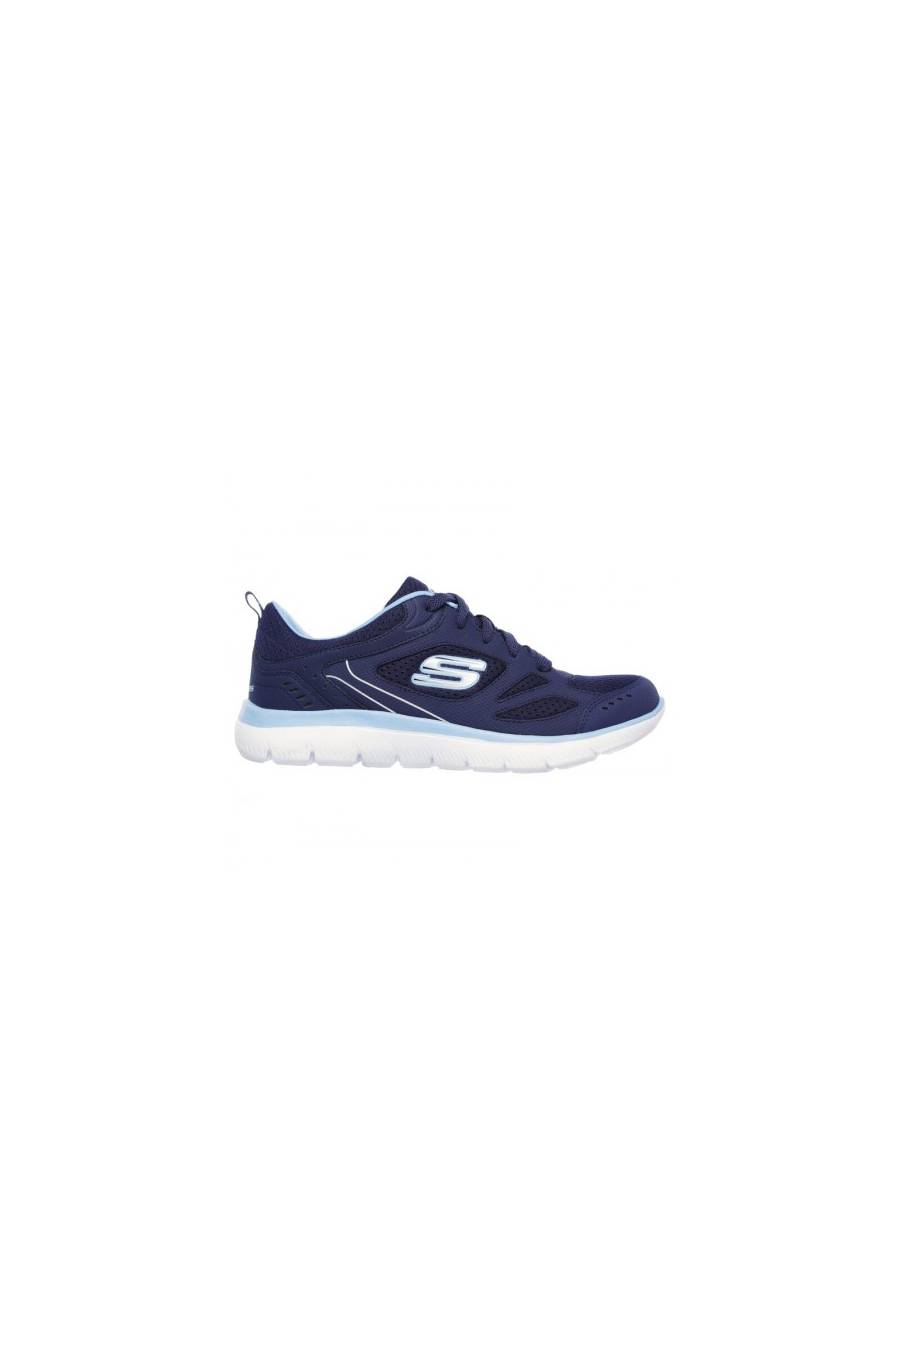 Zapatillas Skechers Summits-Suited 12982-NVBL